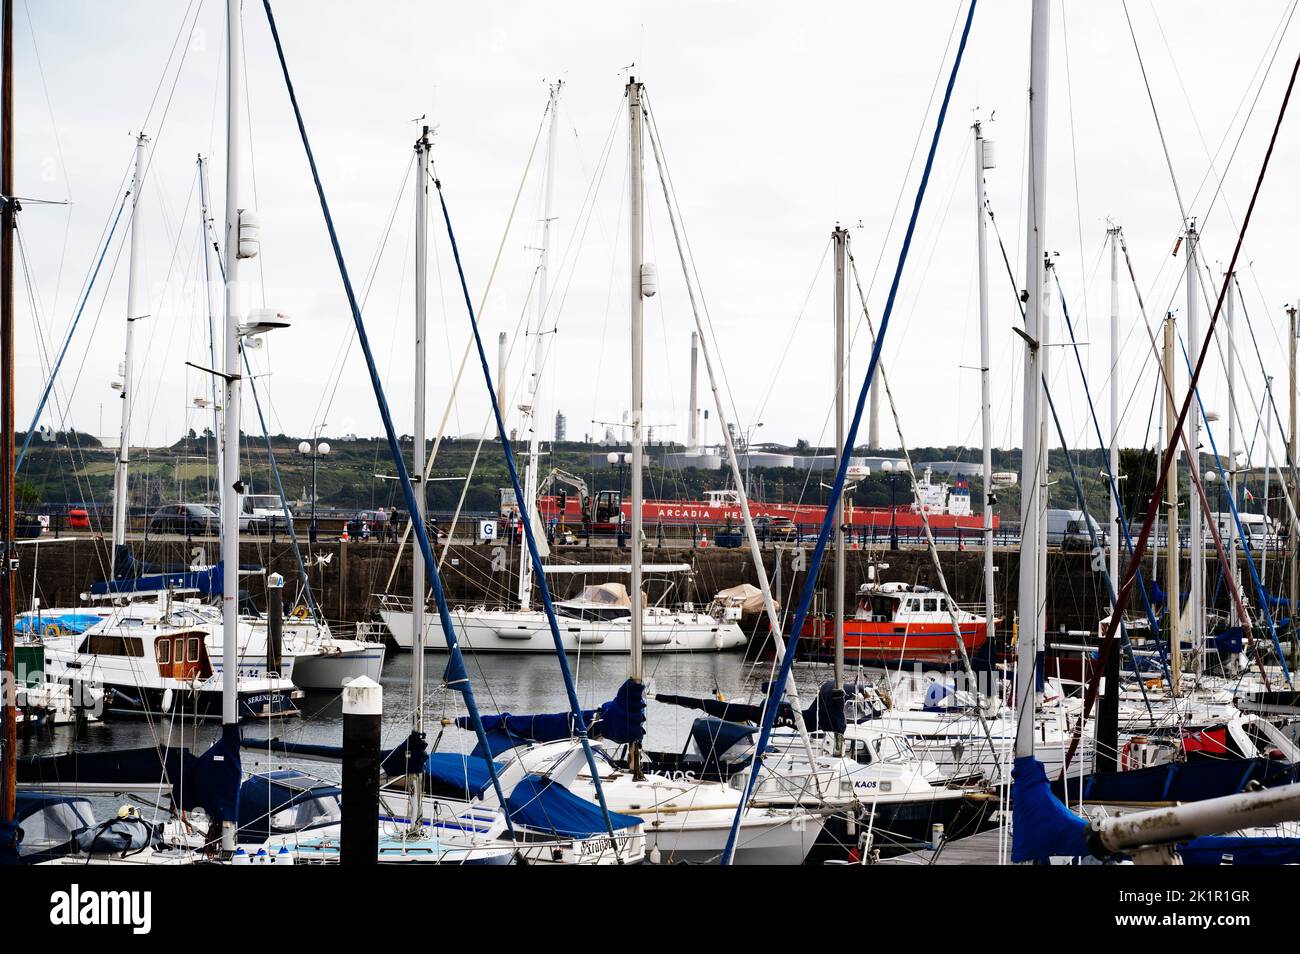 Wales, Pembrokeshire. Milford haven marina. Yachts on their moorings with oil tanker Arcadia Helas in the distance. Stock Photo